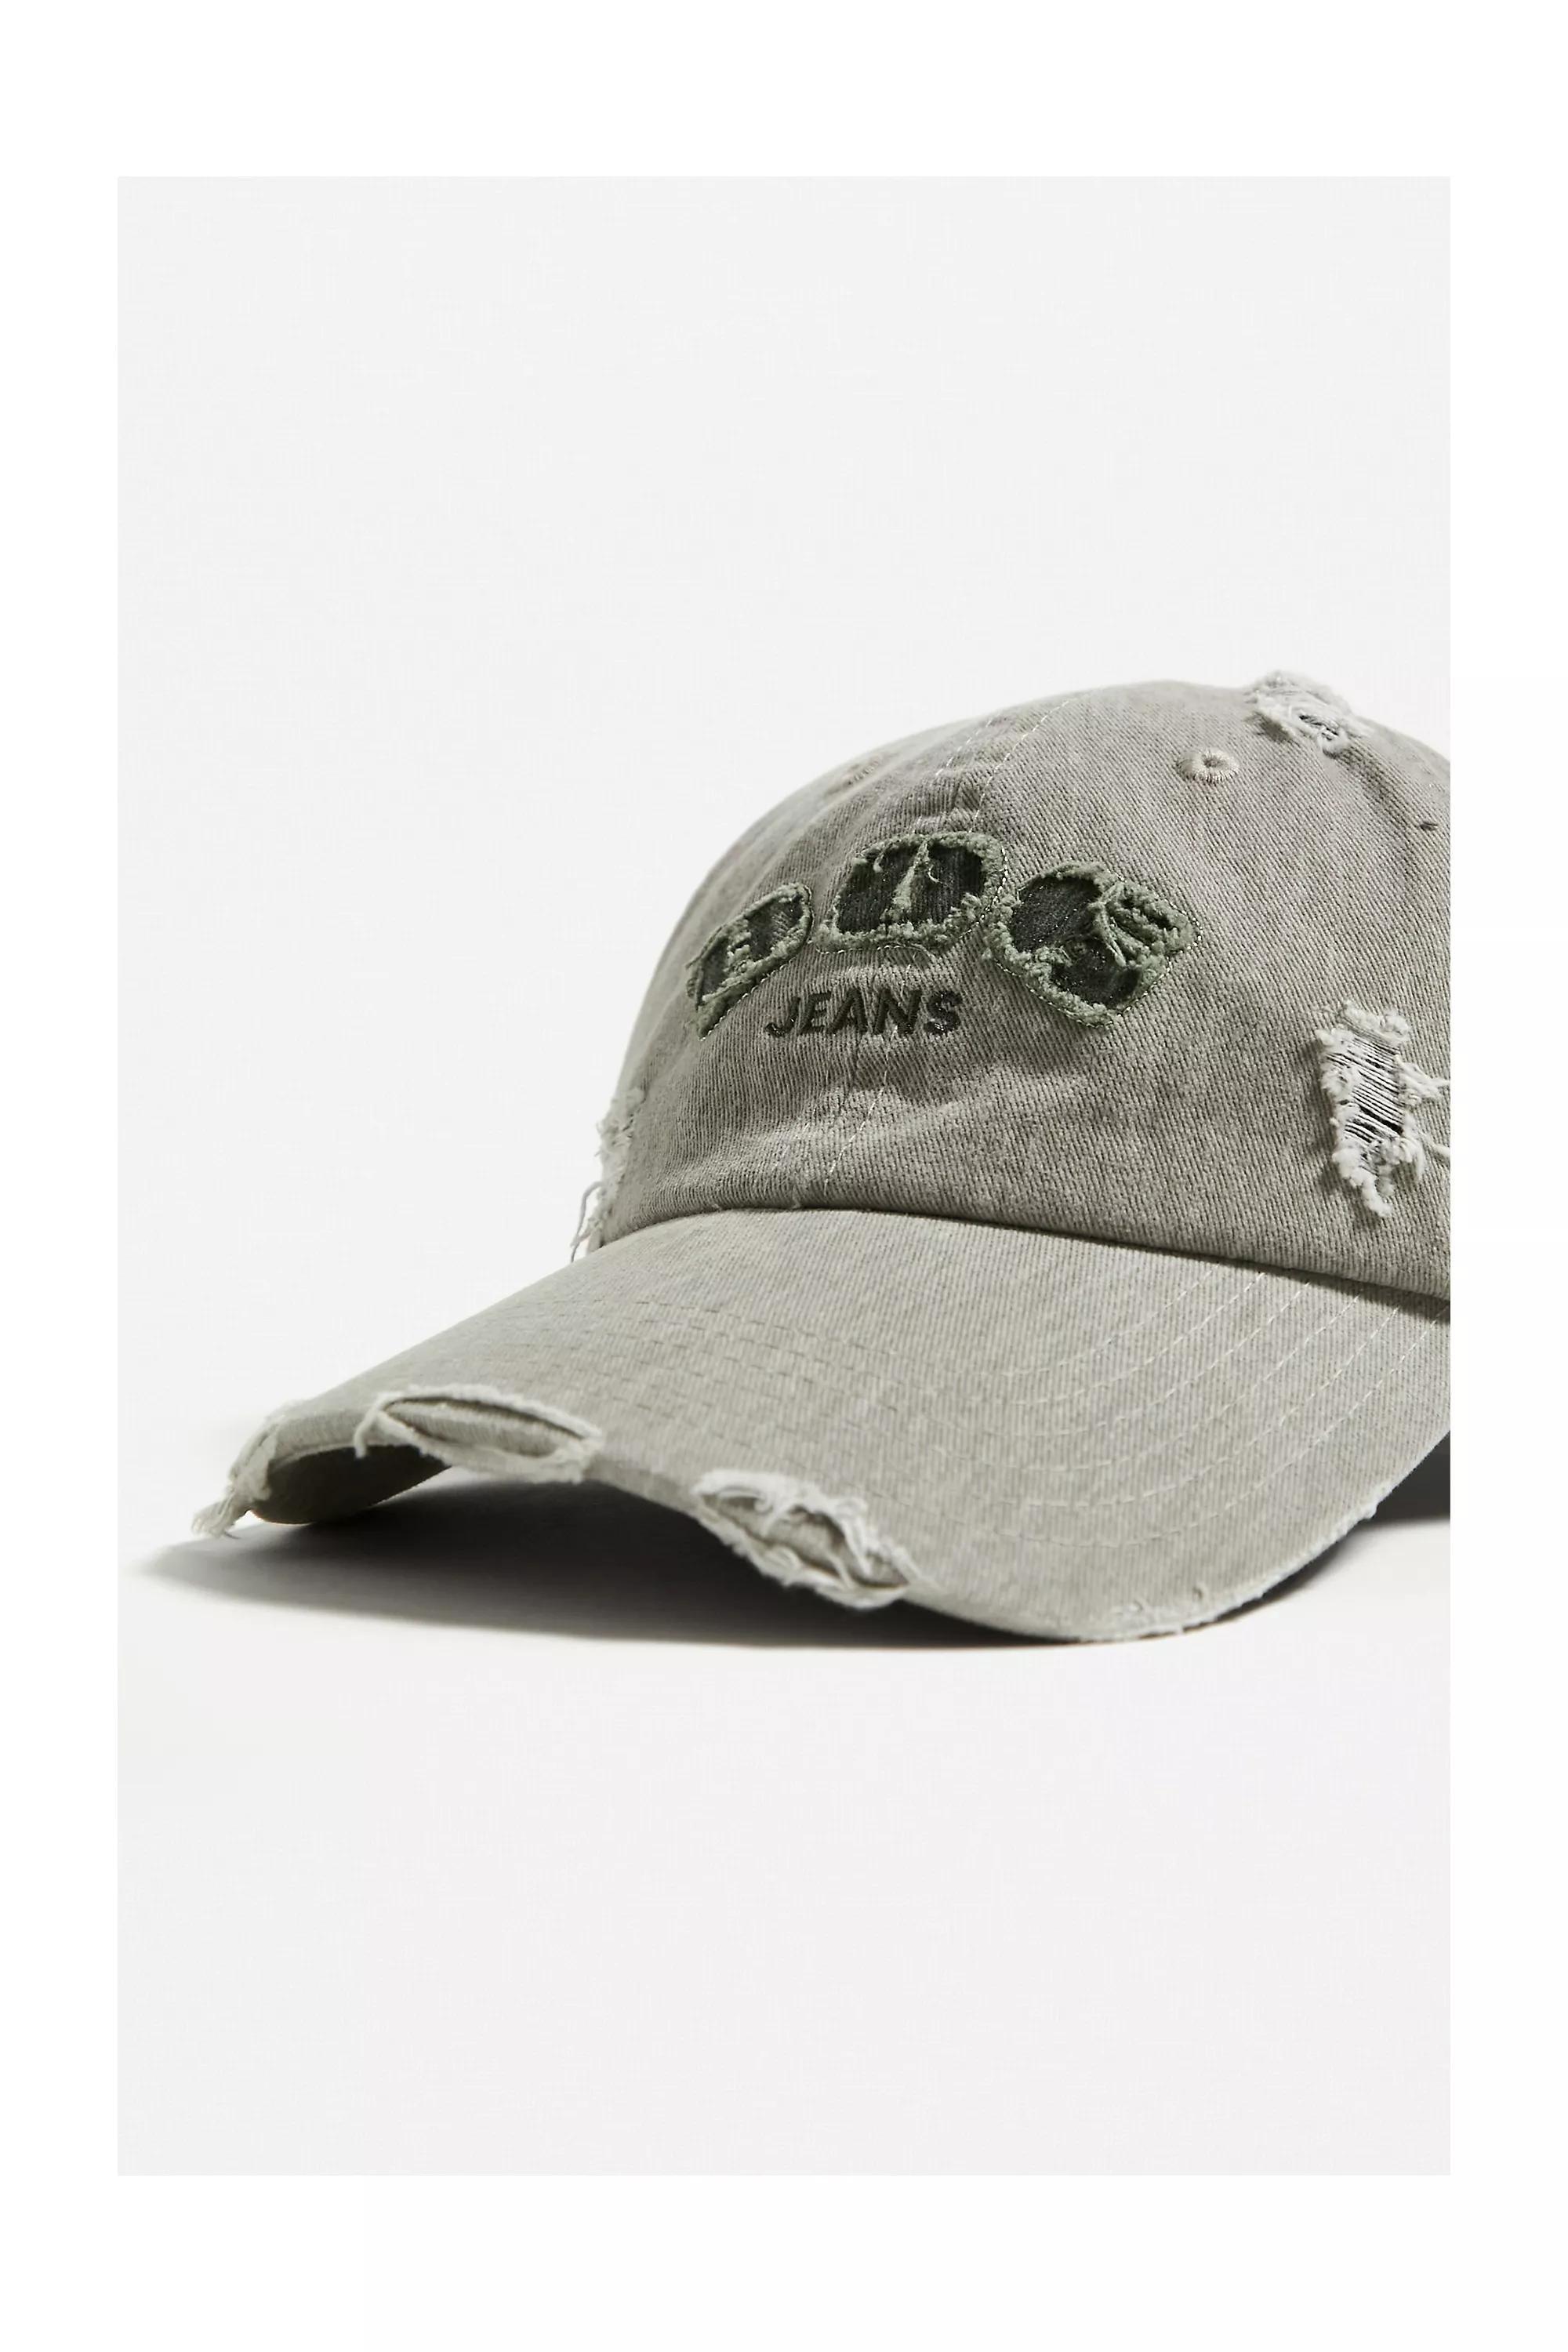 Urban Outfitters - Grey Distressed Logo Cap